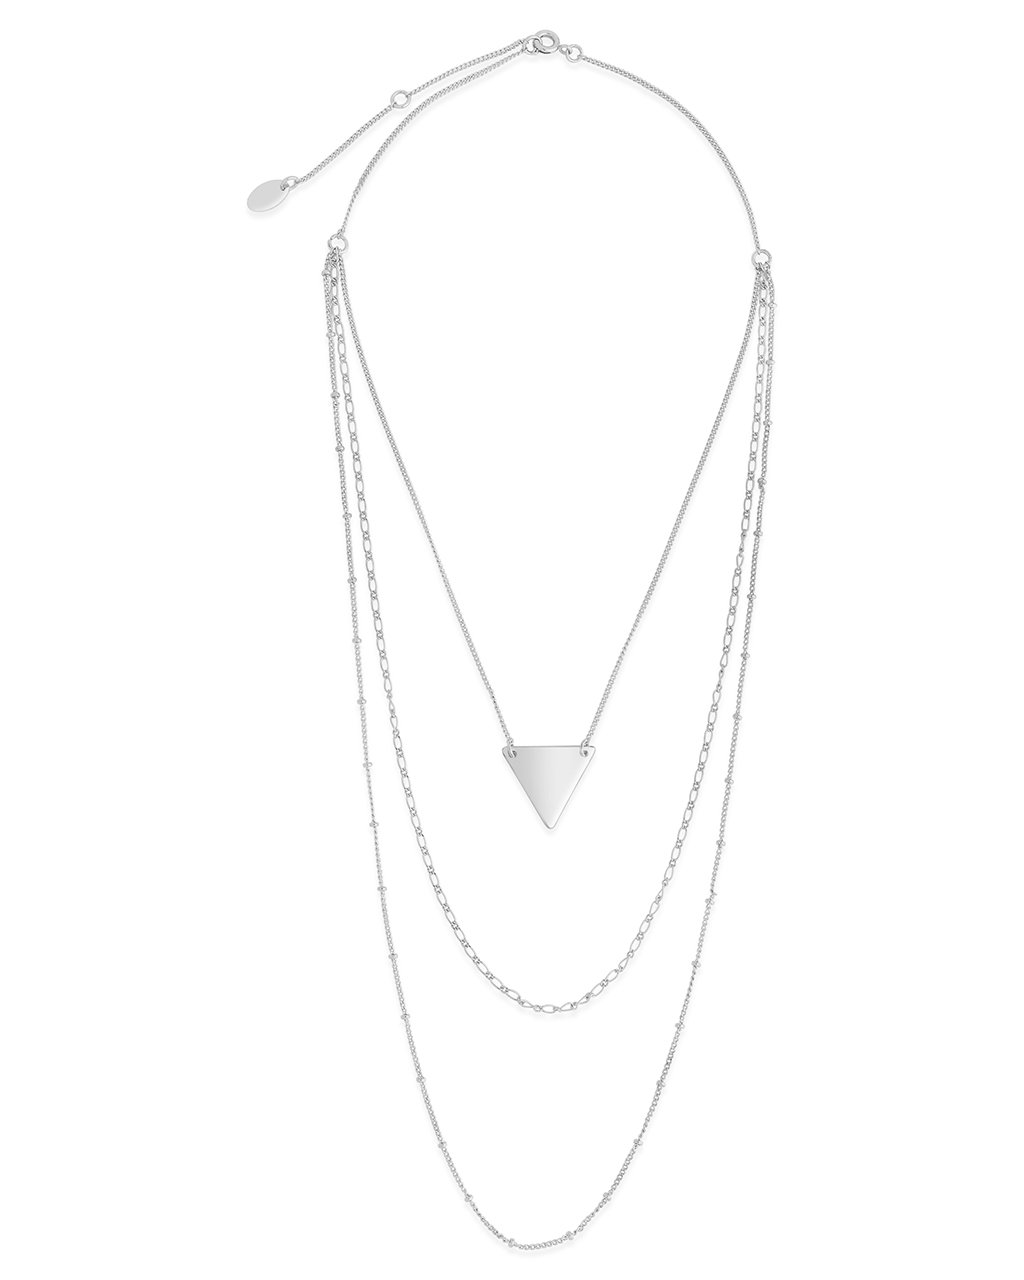 Triple Chain Layered Triangle Necklace - Sterling Forever